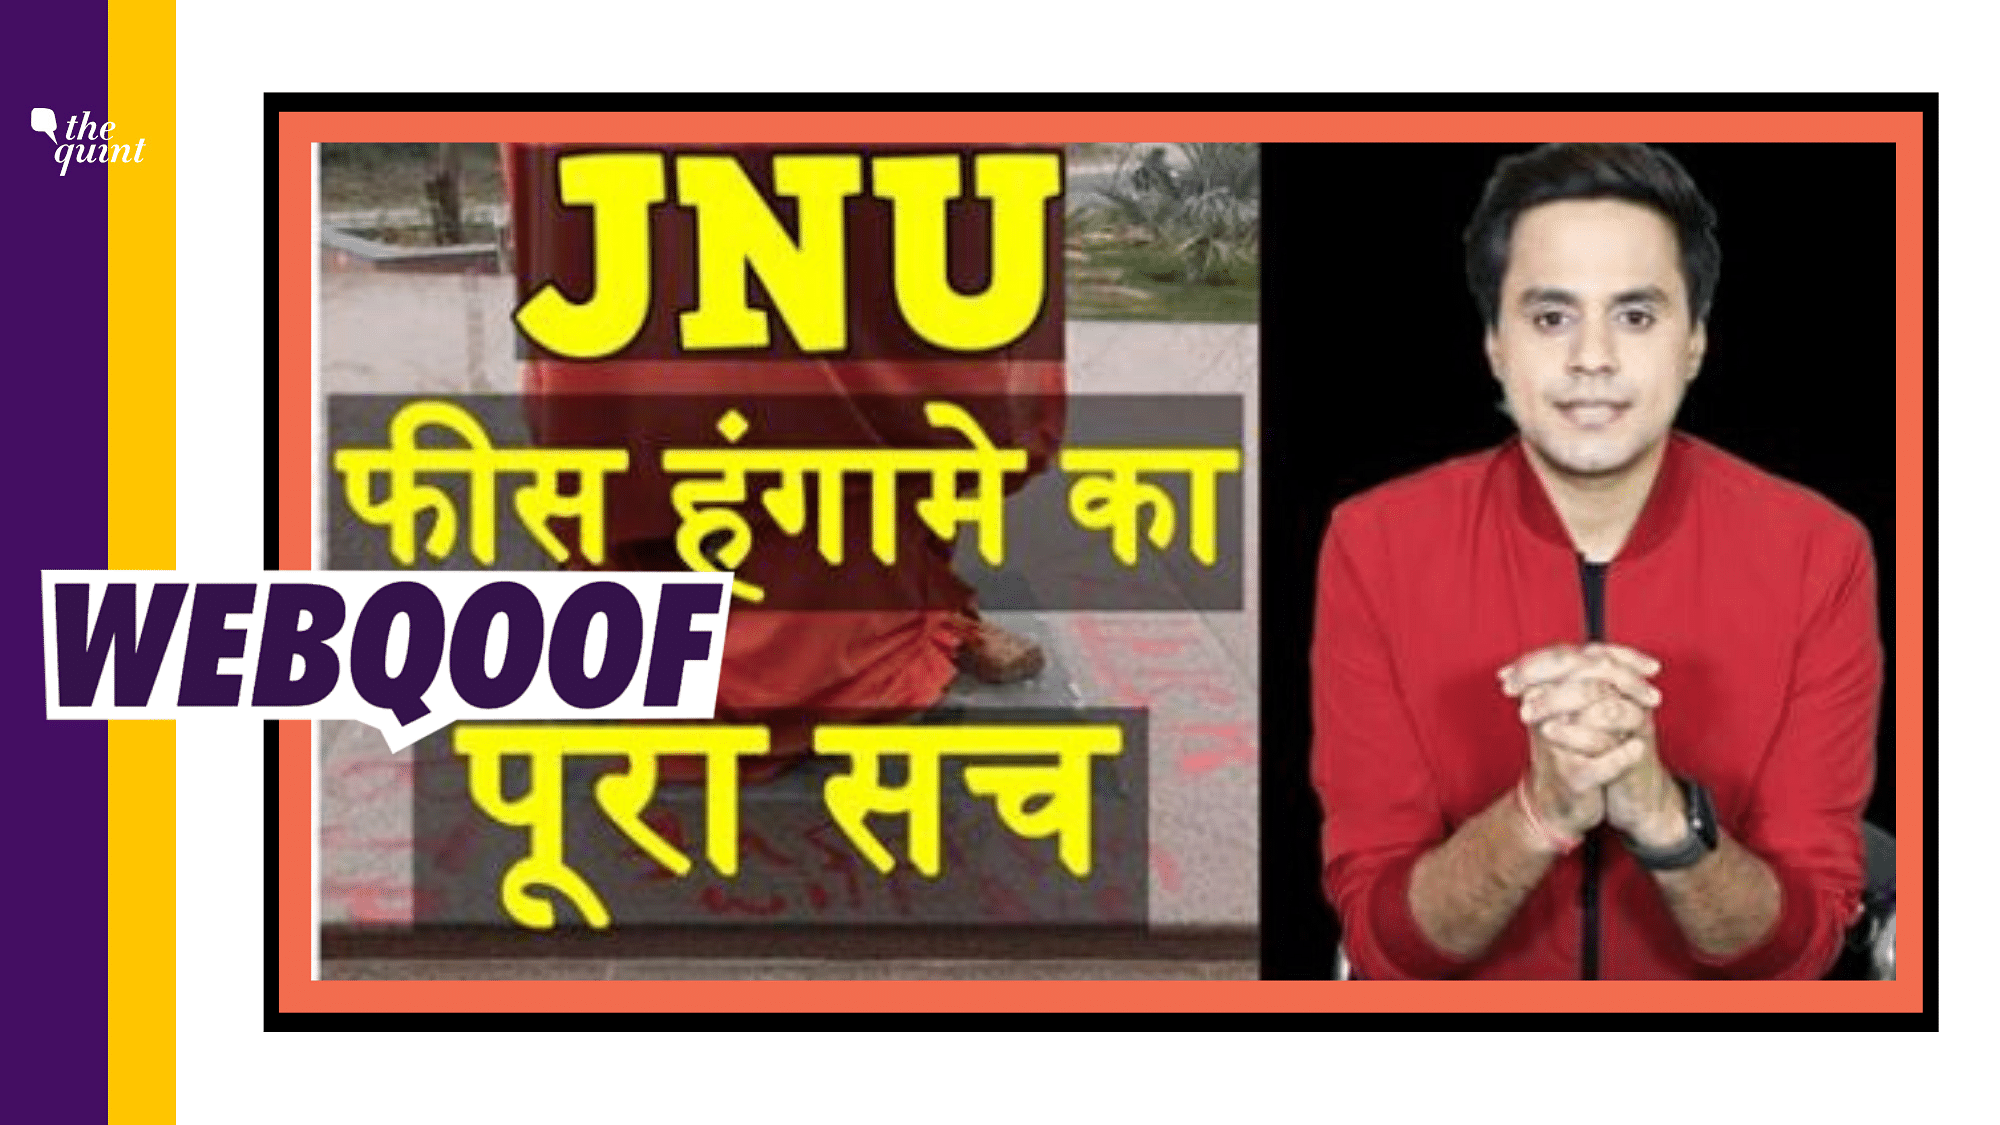 A recent video of radio jockey Raunac triggered a social media storm after he was seen endorsing fake news related to JNU in it.